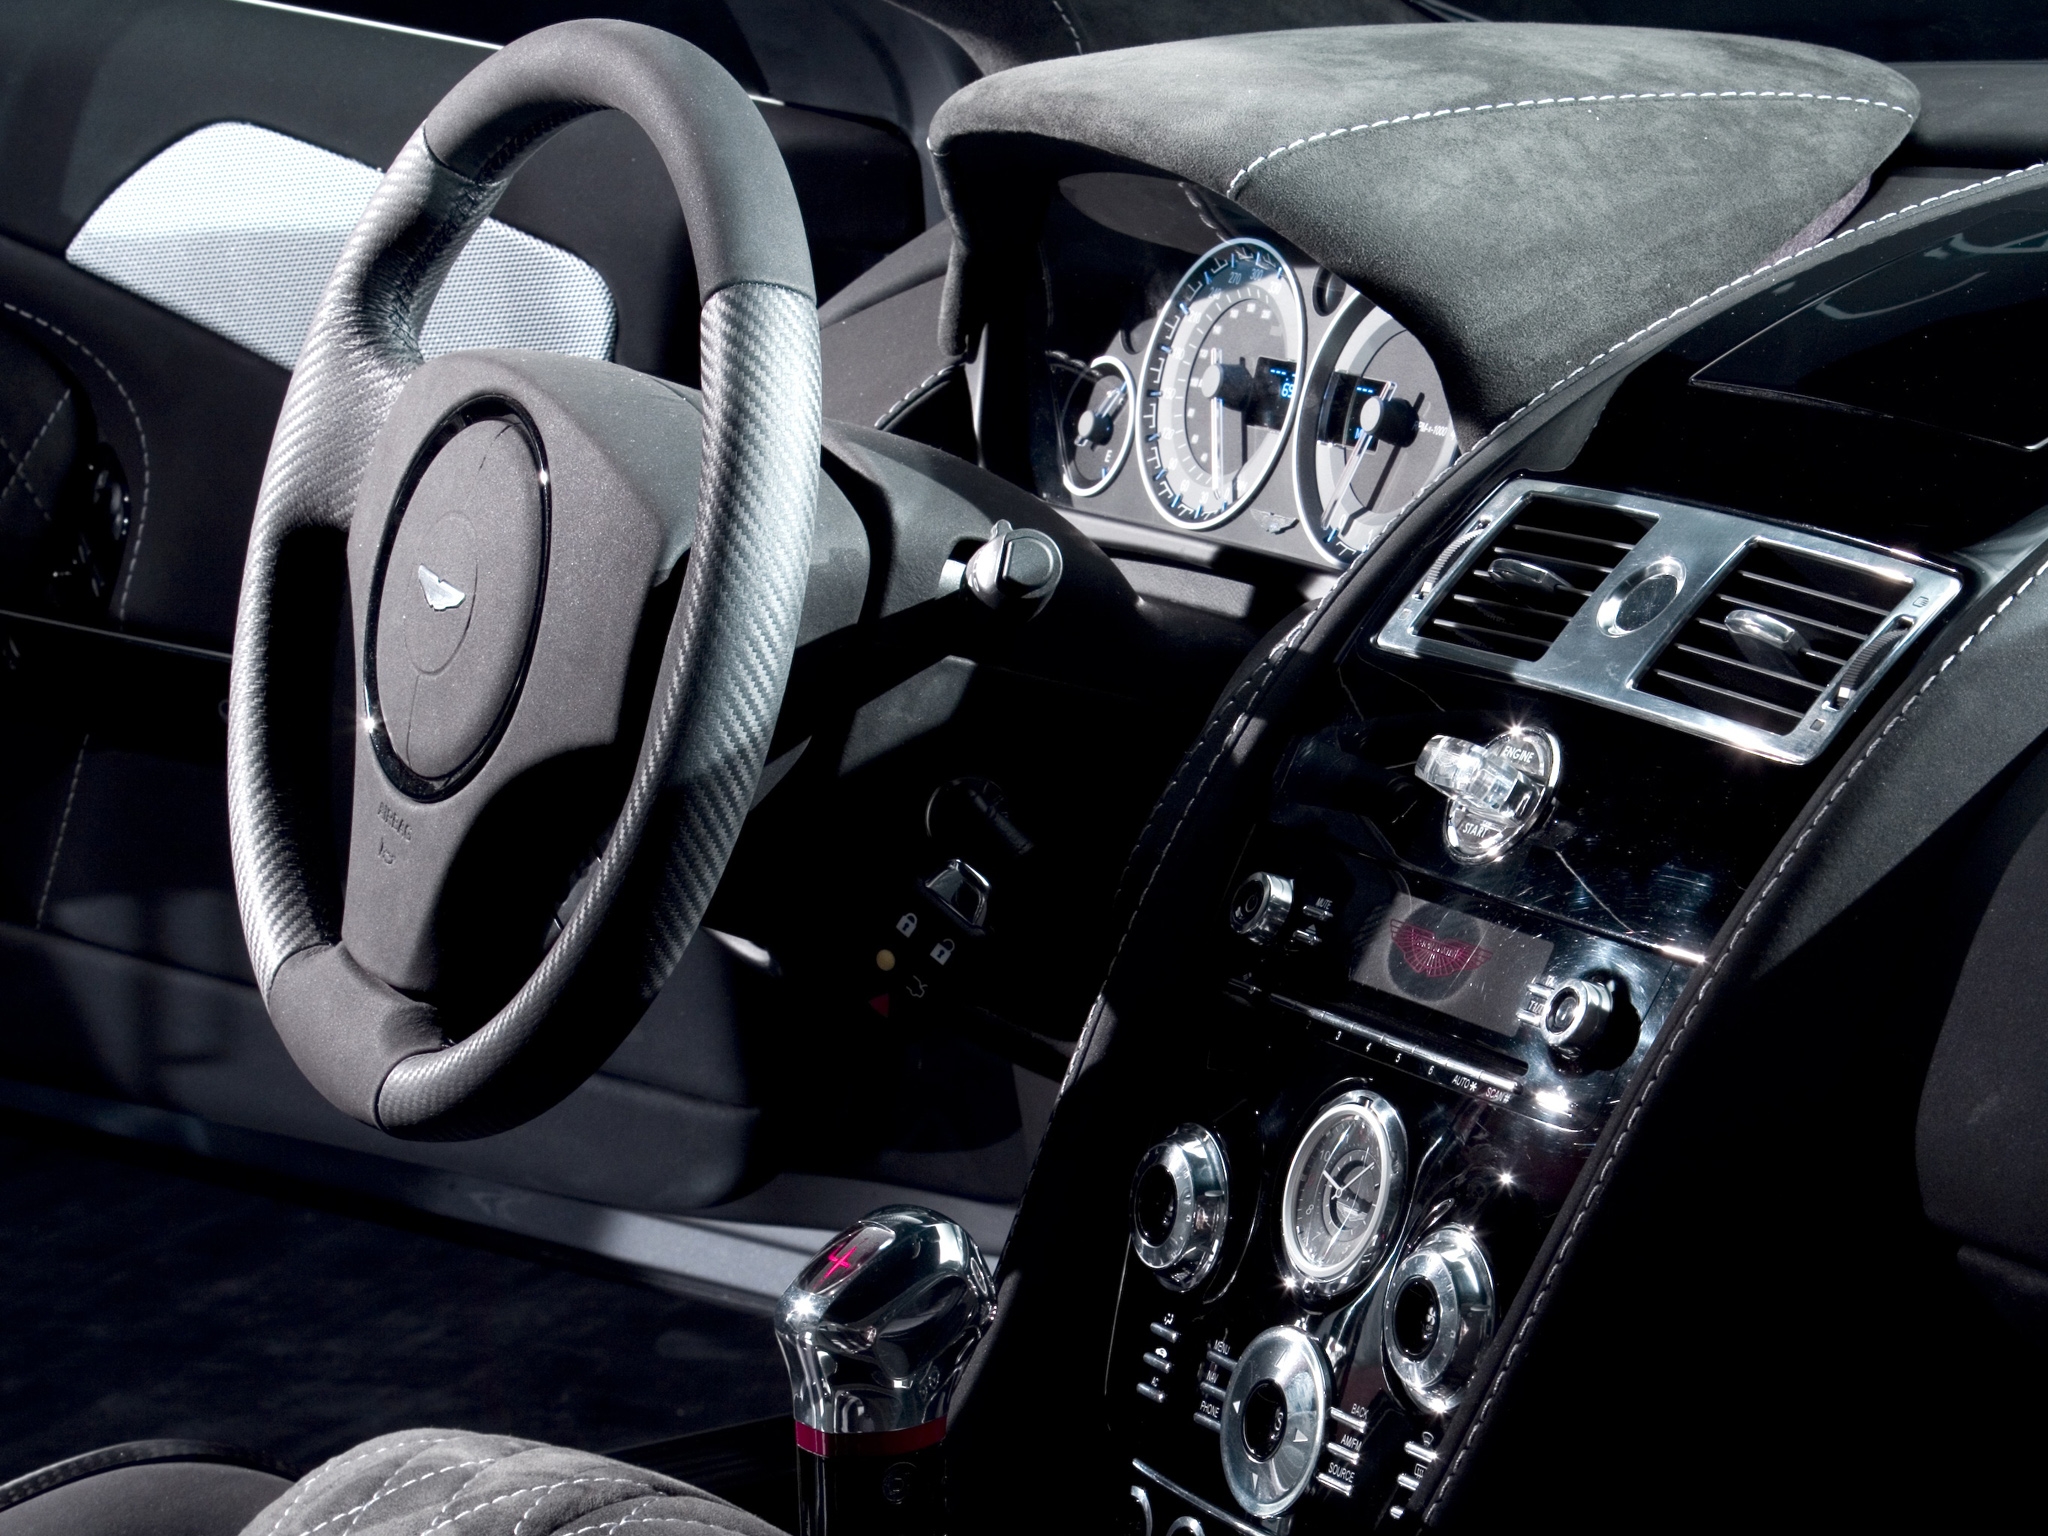 124399 download wallpaper interior, aston martin, cars, black, dbs, steering wheel, rudder, salon, speedometer, 2006 screensavers and pictures for free